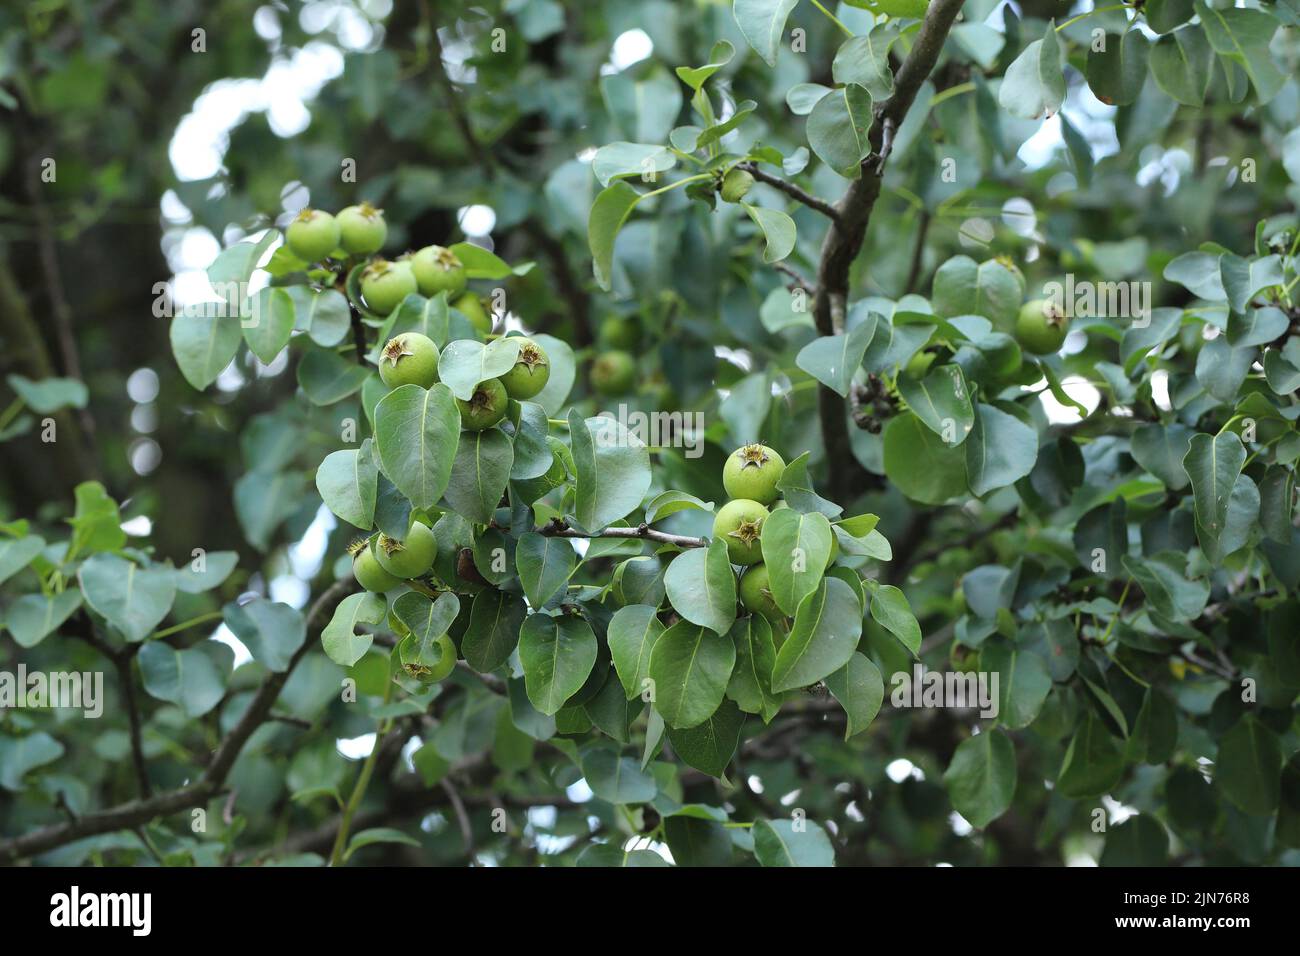 European Wild Pear, Wild Pear (Pyrus pyraster), branch with fruits. Stock Photo